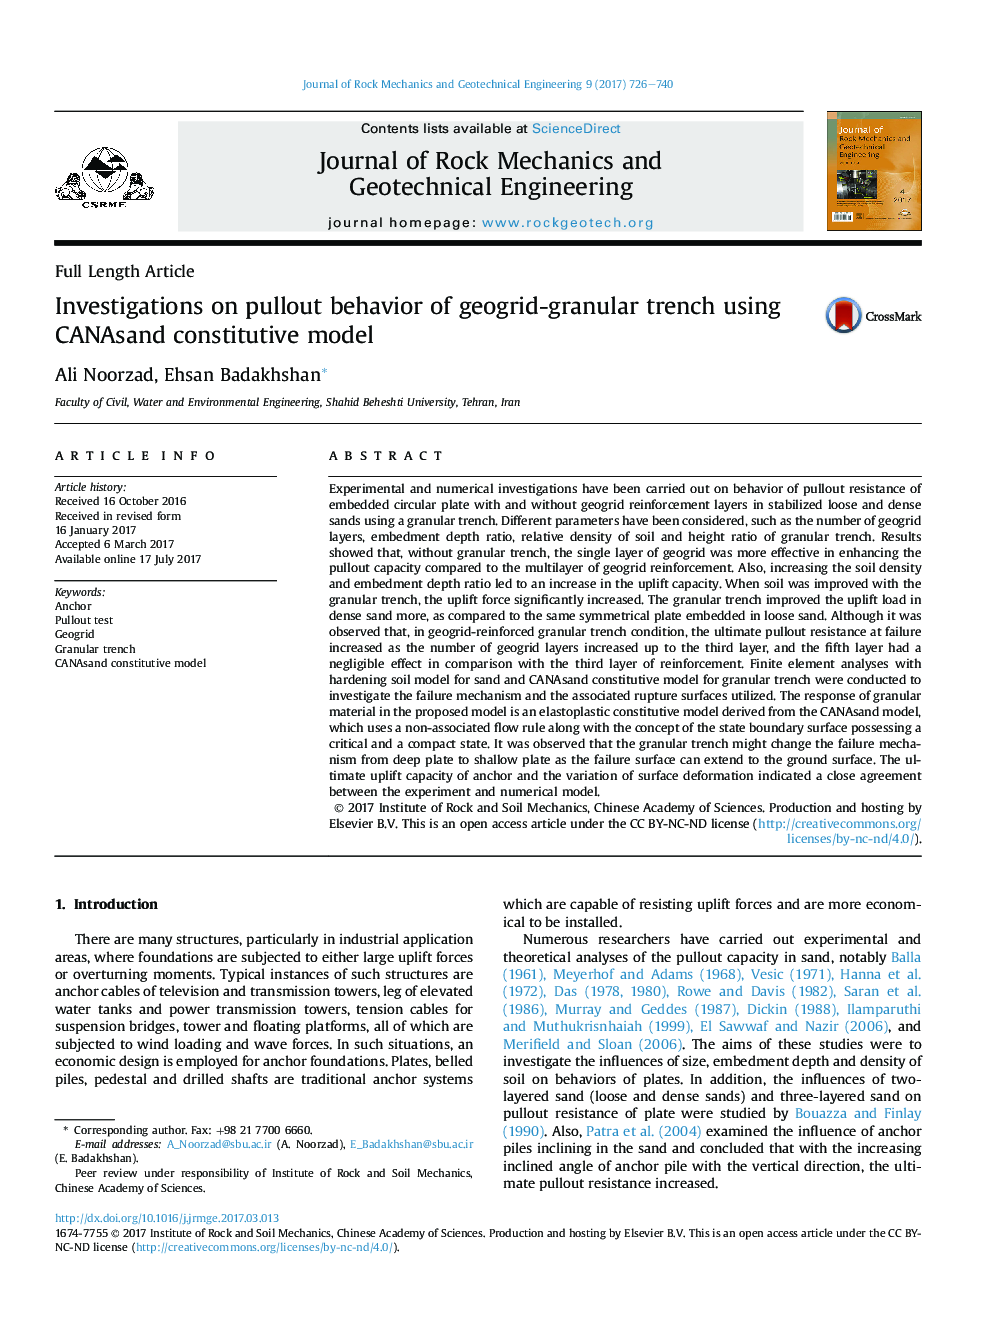 Investigations on pullout behavior of geogrid-granular trench using CANAsand constitutive model